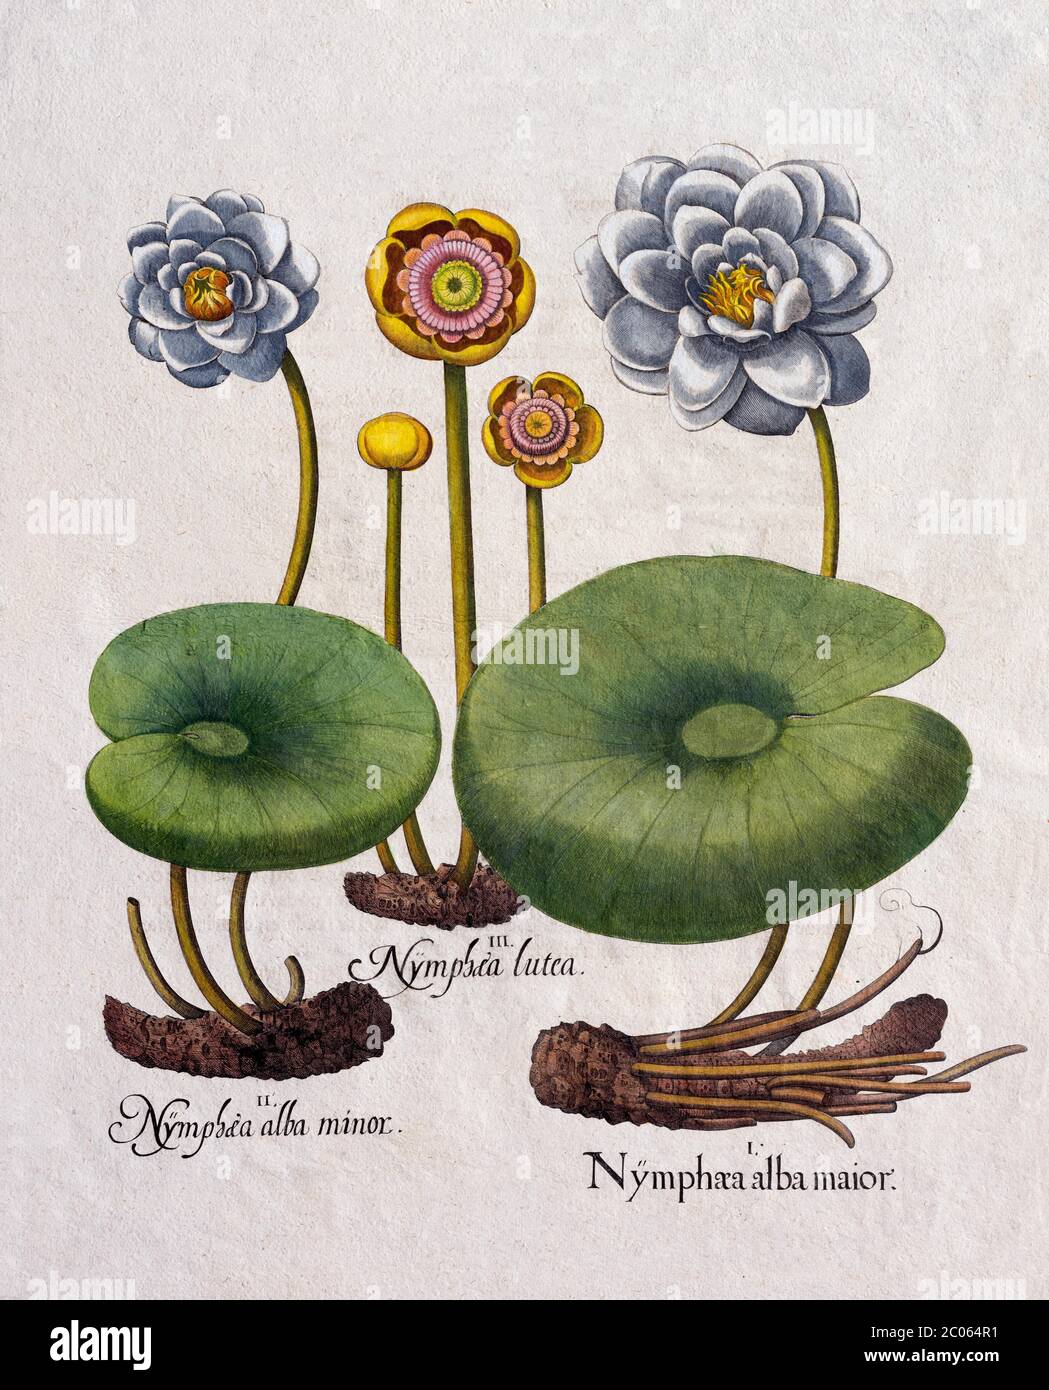 Water lilies (Nymphaea), hand-coloured copper engraving by Basilius Besler, from Hortus Eystettensis, 1613 Stock Photo